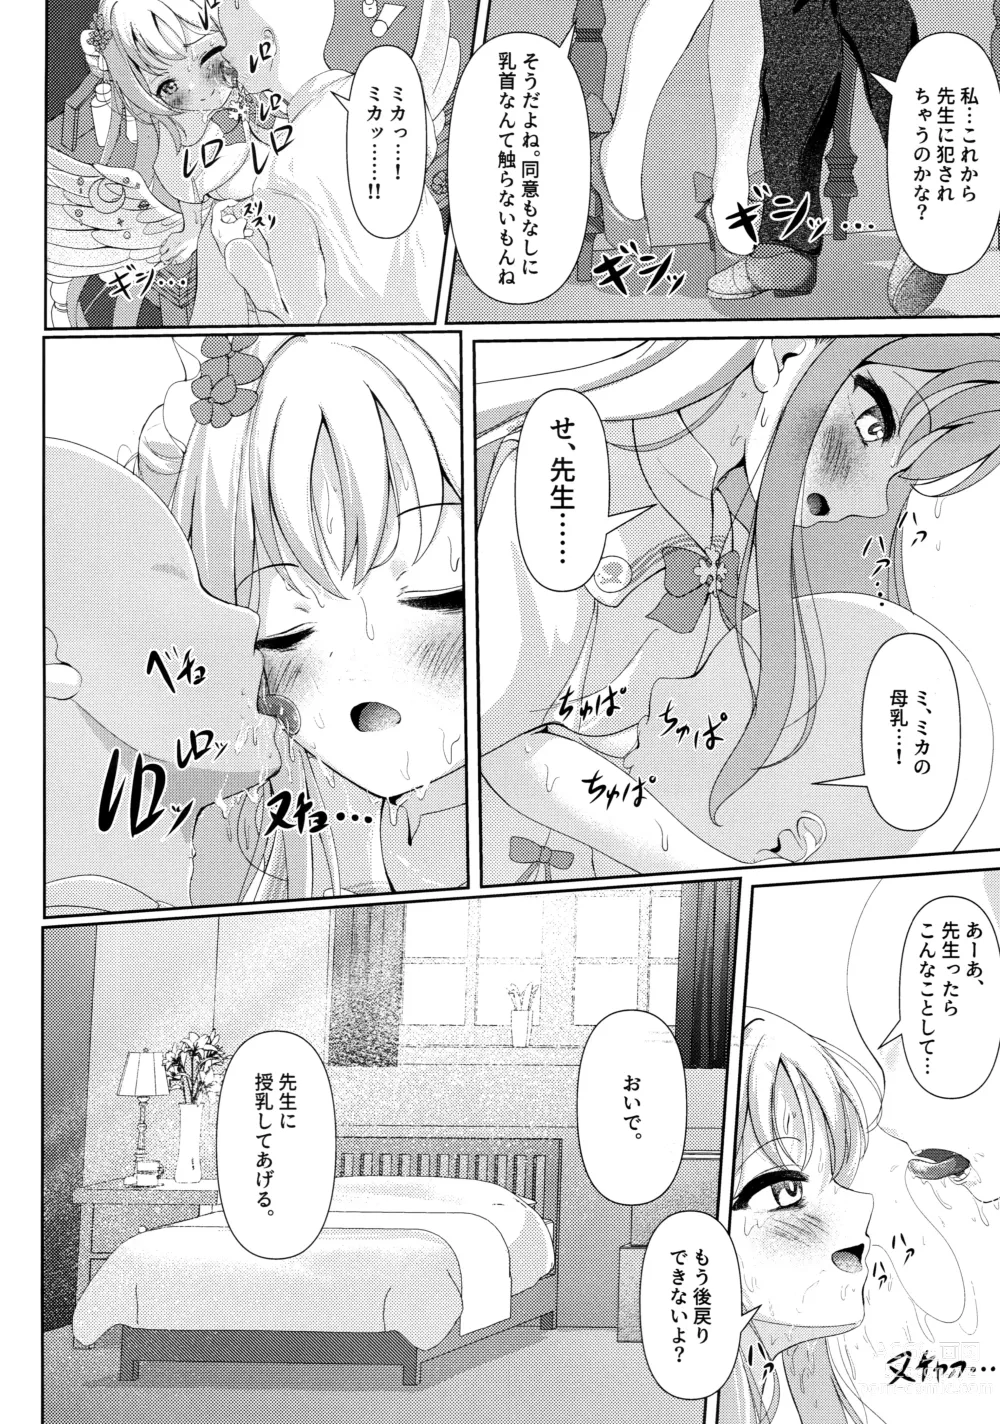 Page 9 of doujinshi Sleeping with the Dear Constellation.